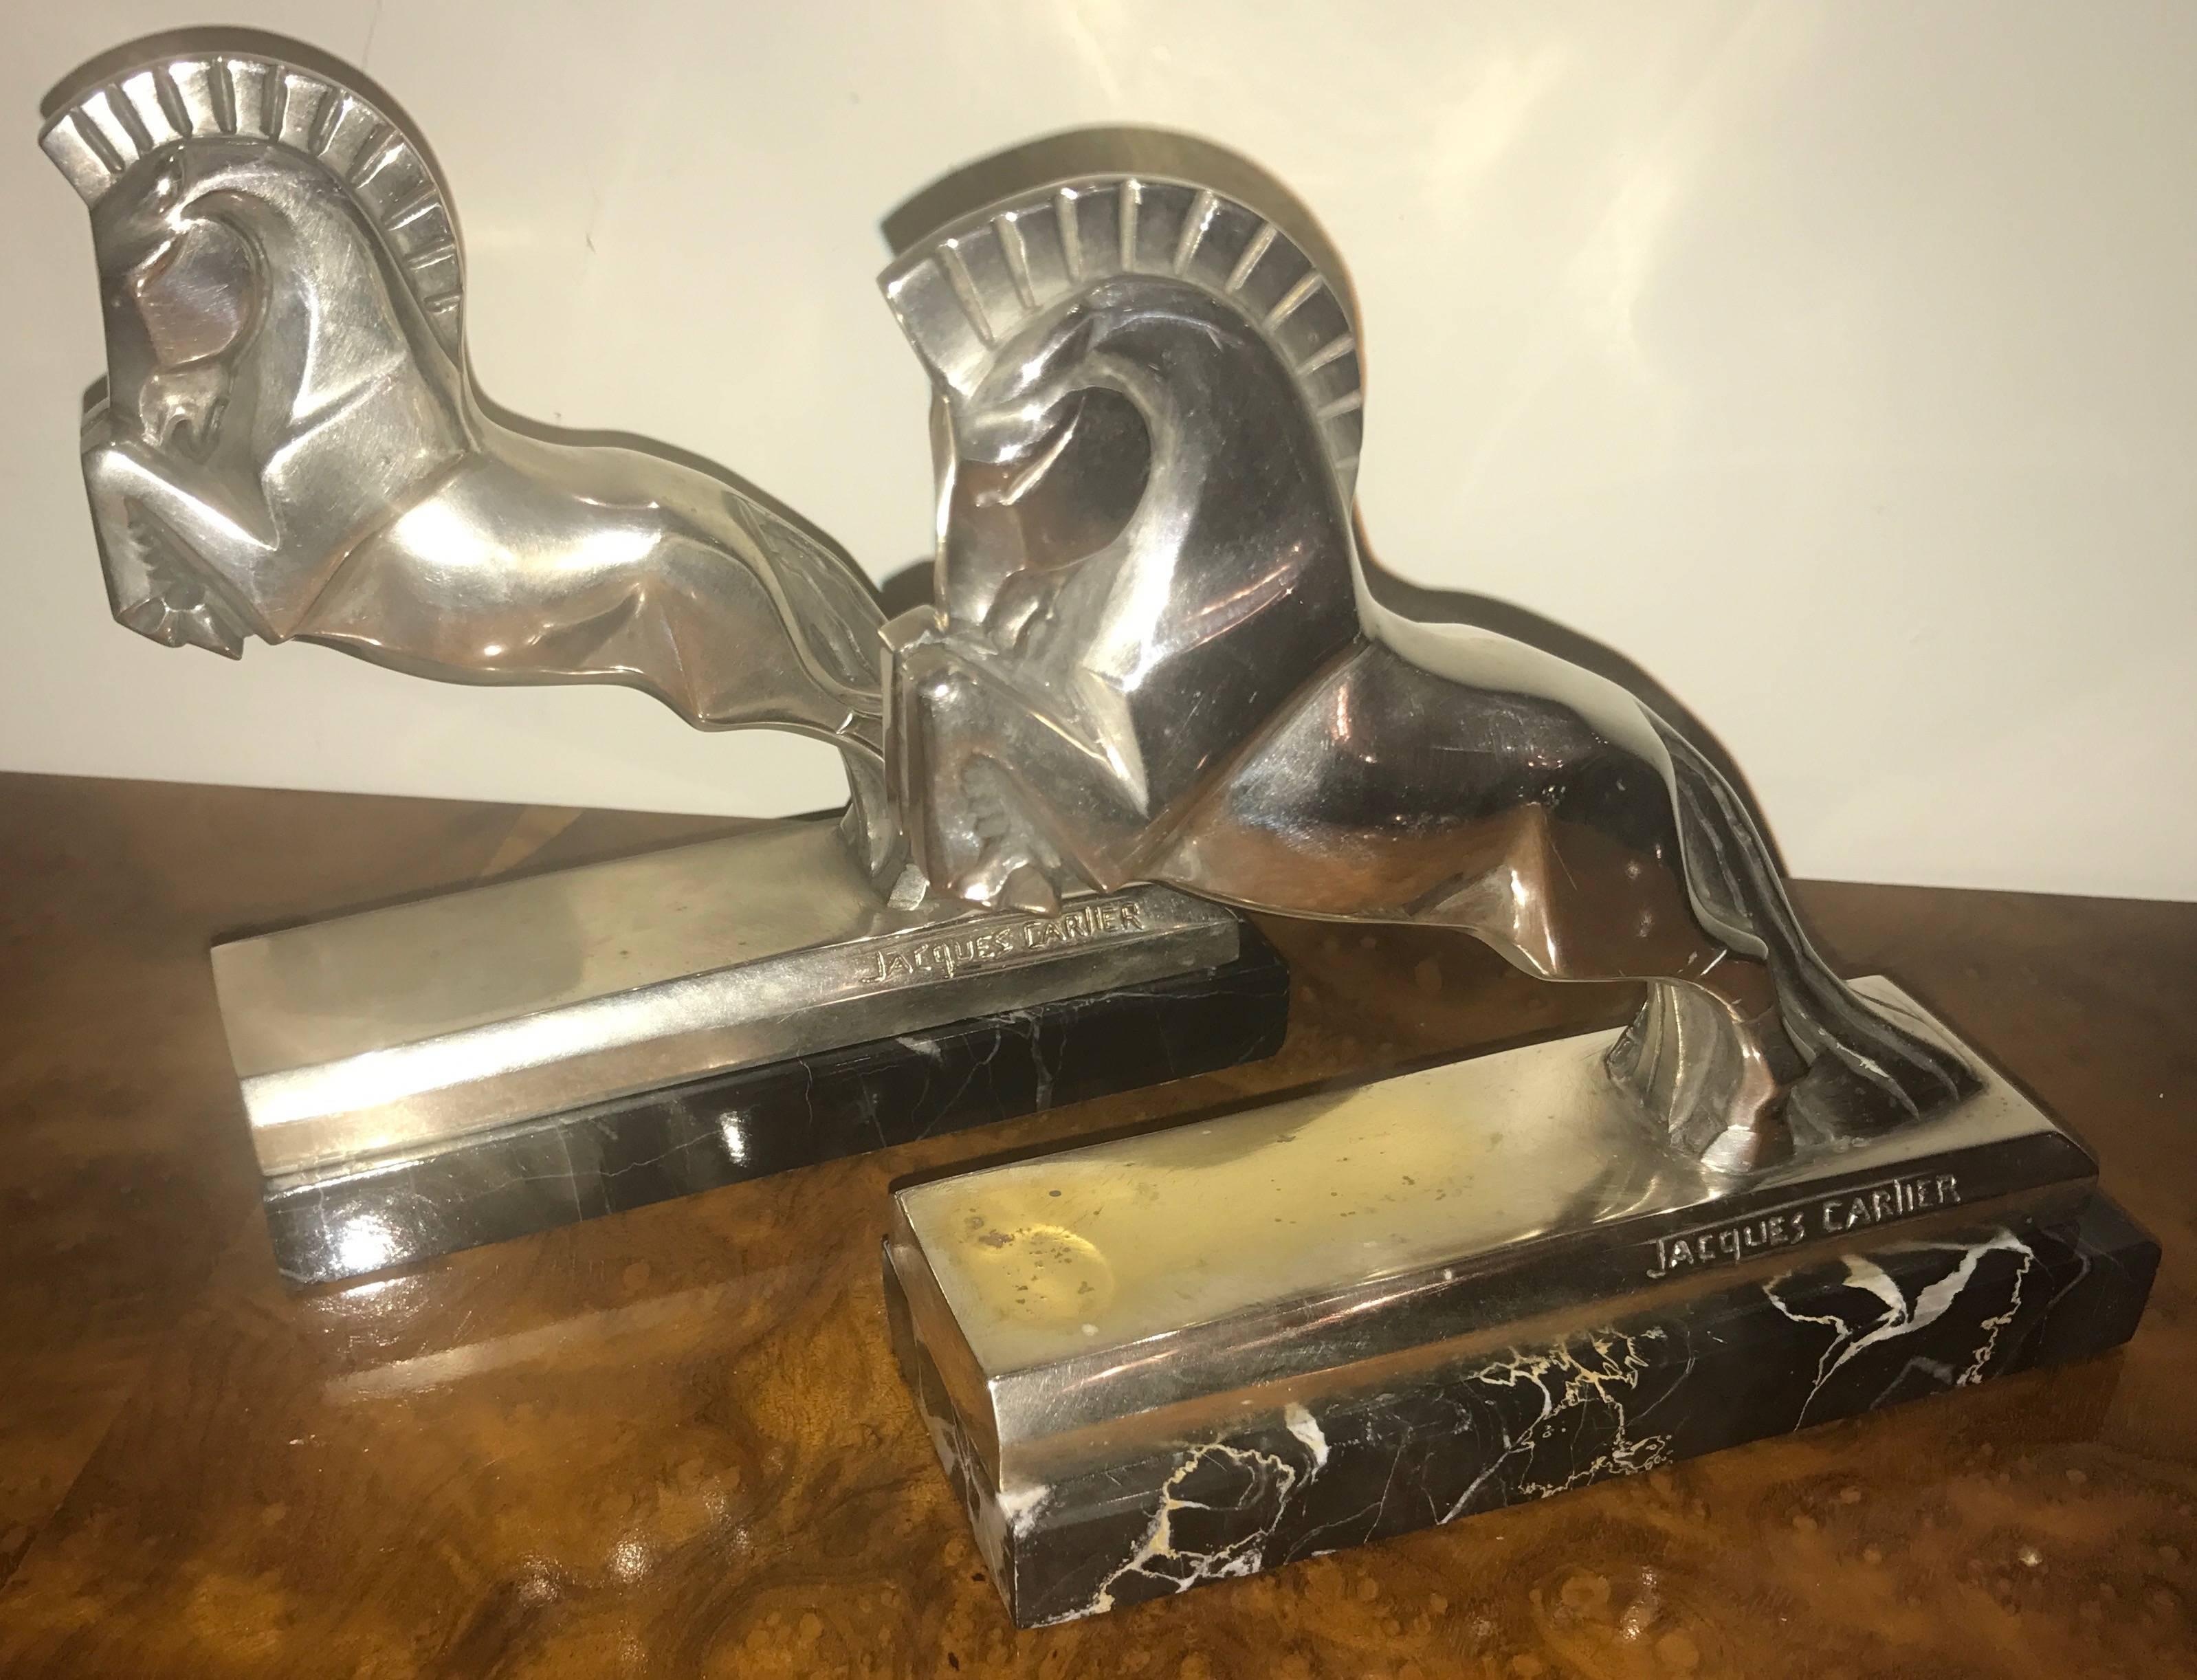 Silvered plated bronze Art Deco horse bookends by Jacques Cartier (French, 1907-2001). Both signed Jacques Cartier in lower area and both on a black marble base. Made in France, circa 1930. Cubist sculpture of an equestrian horse with bold mane.